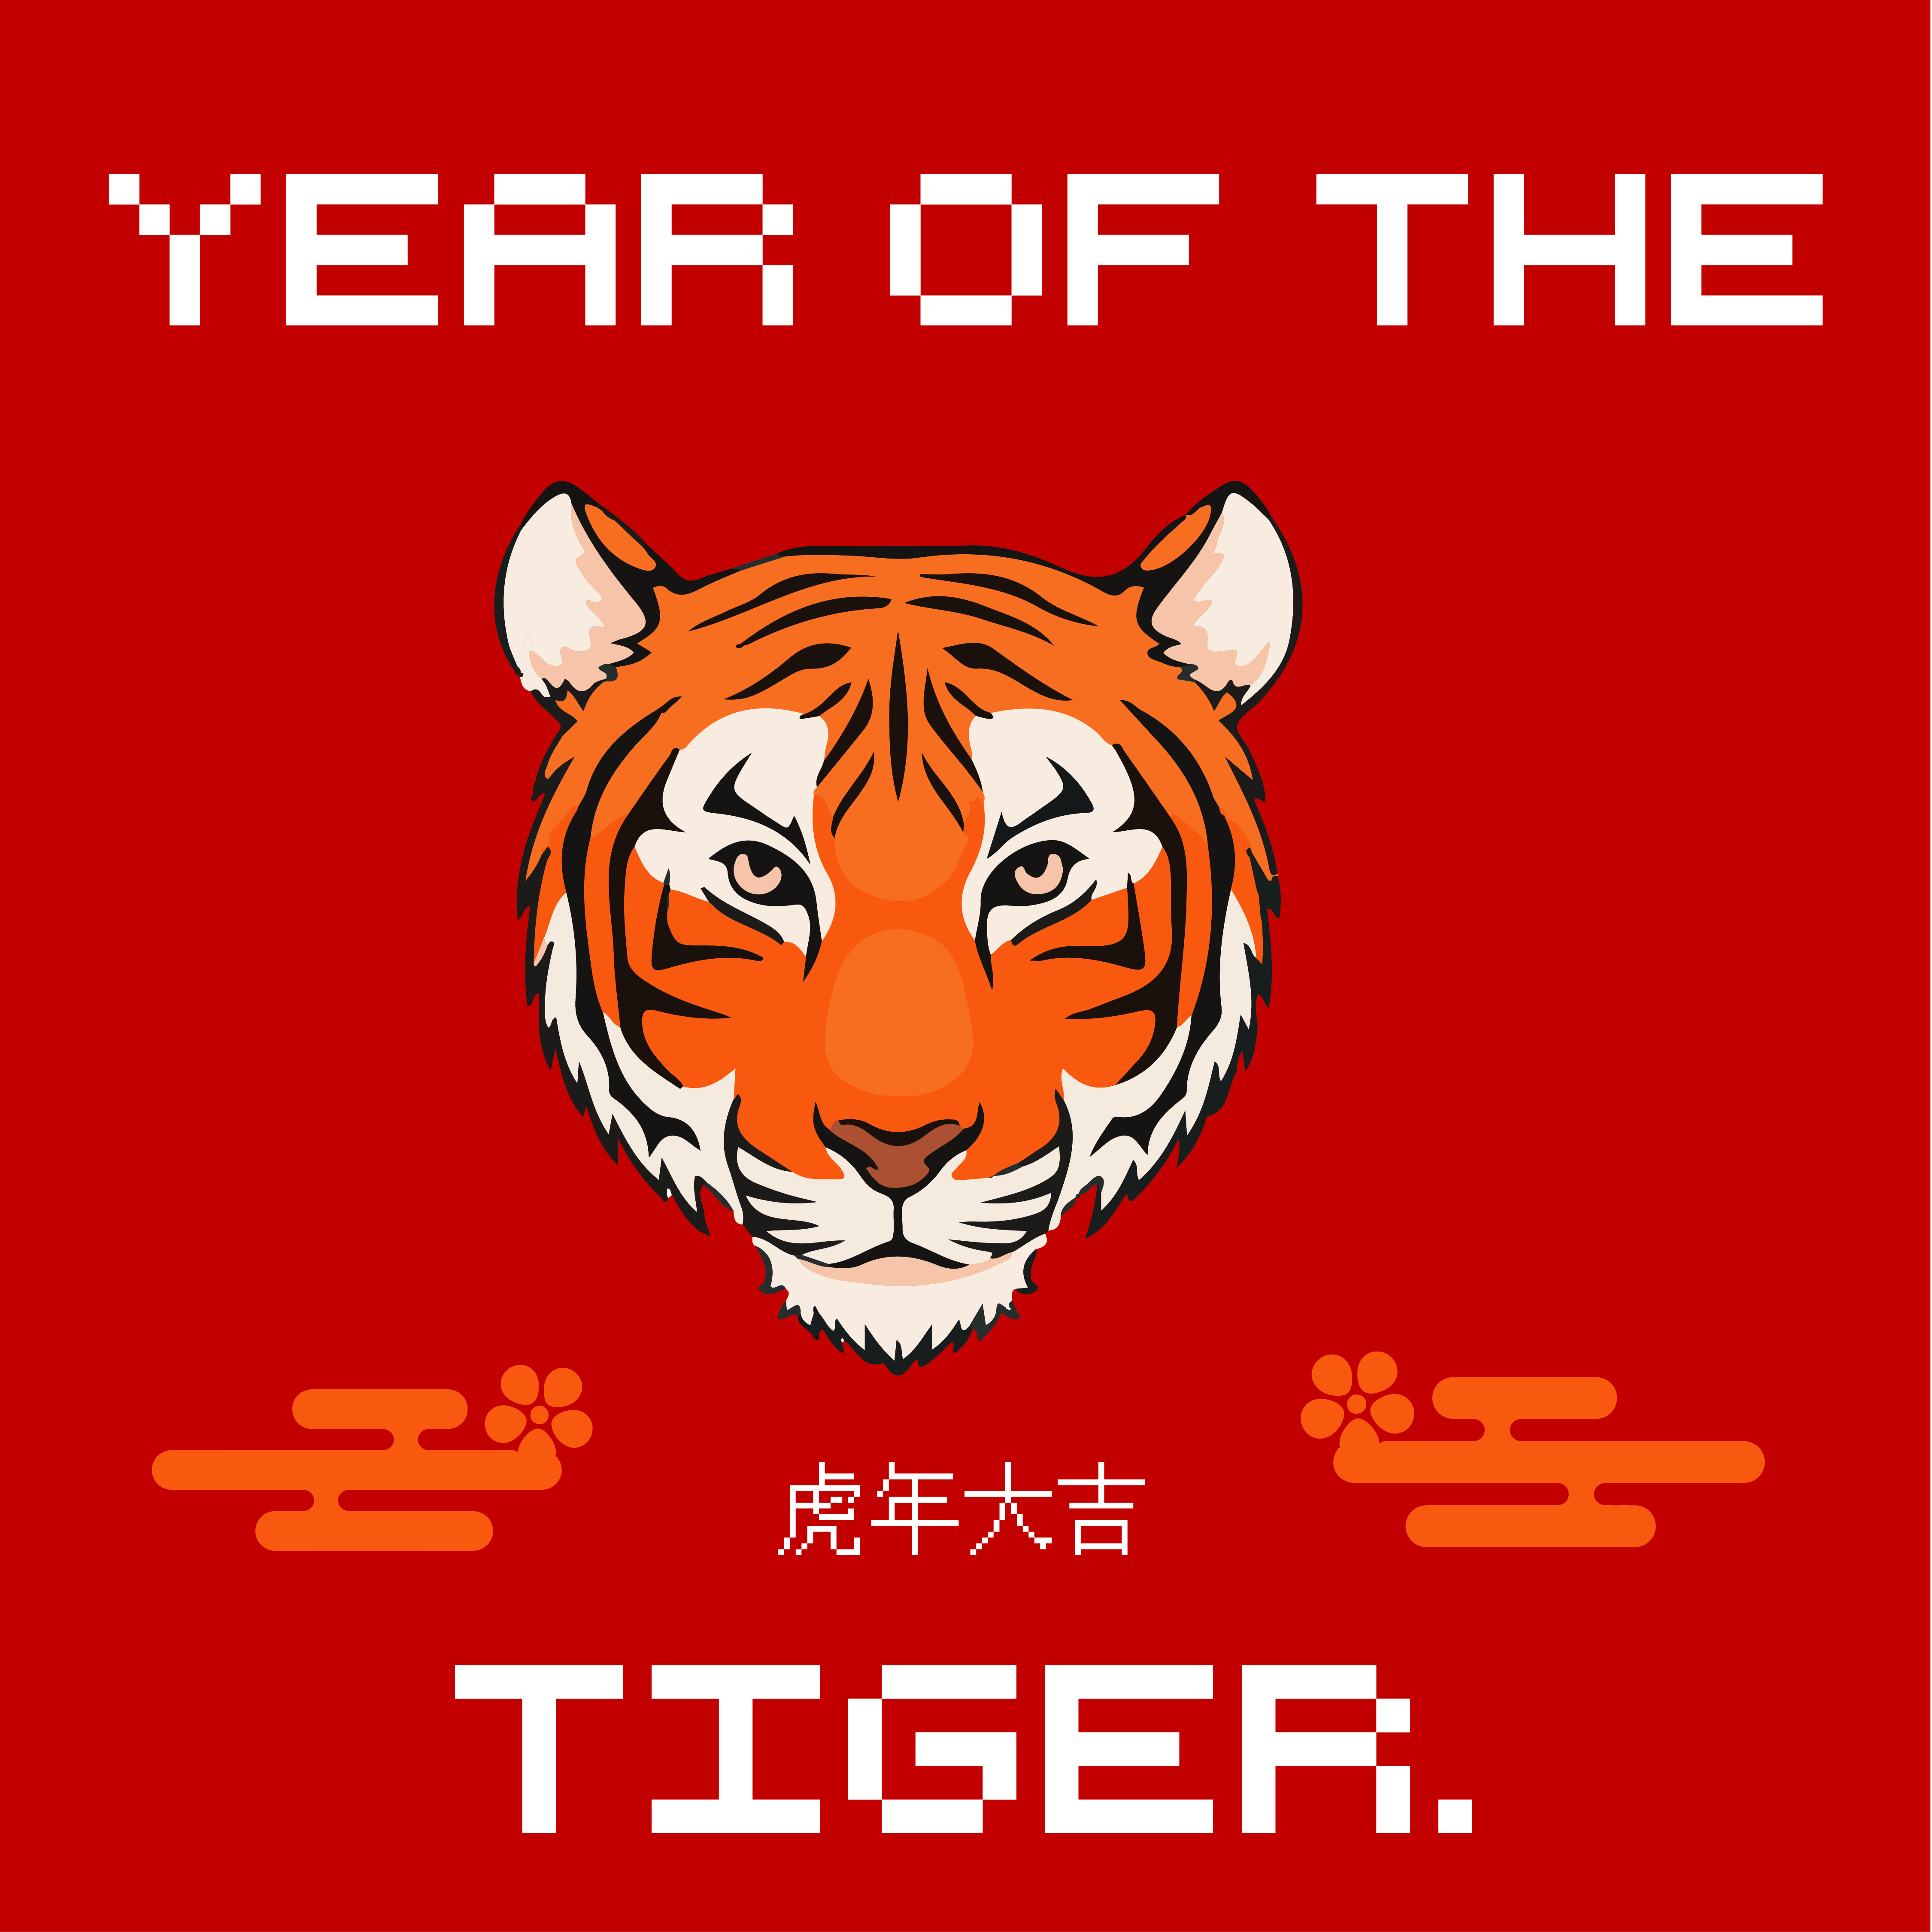 Chinese New Year: Year of the Tiger